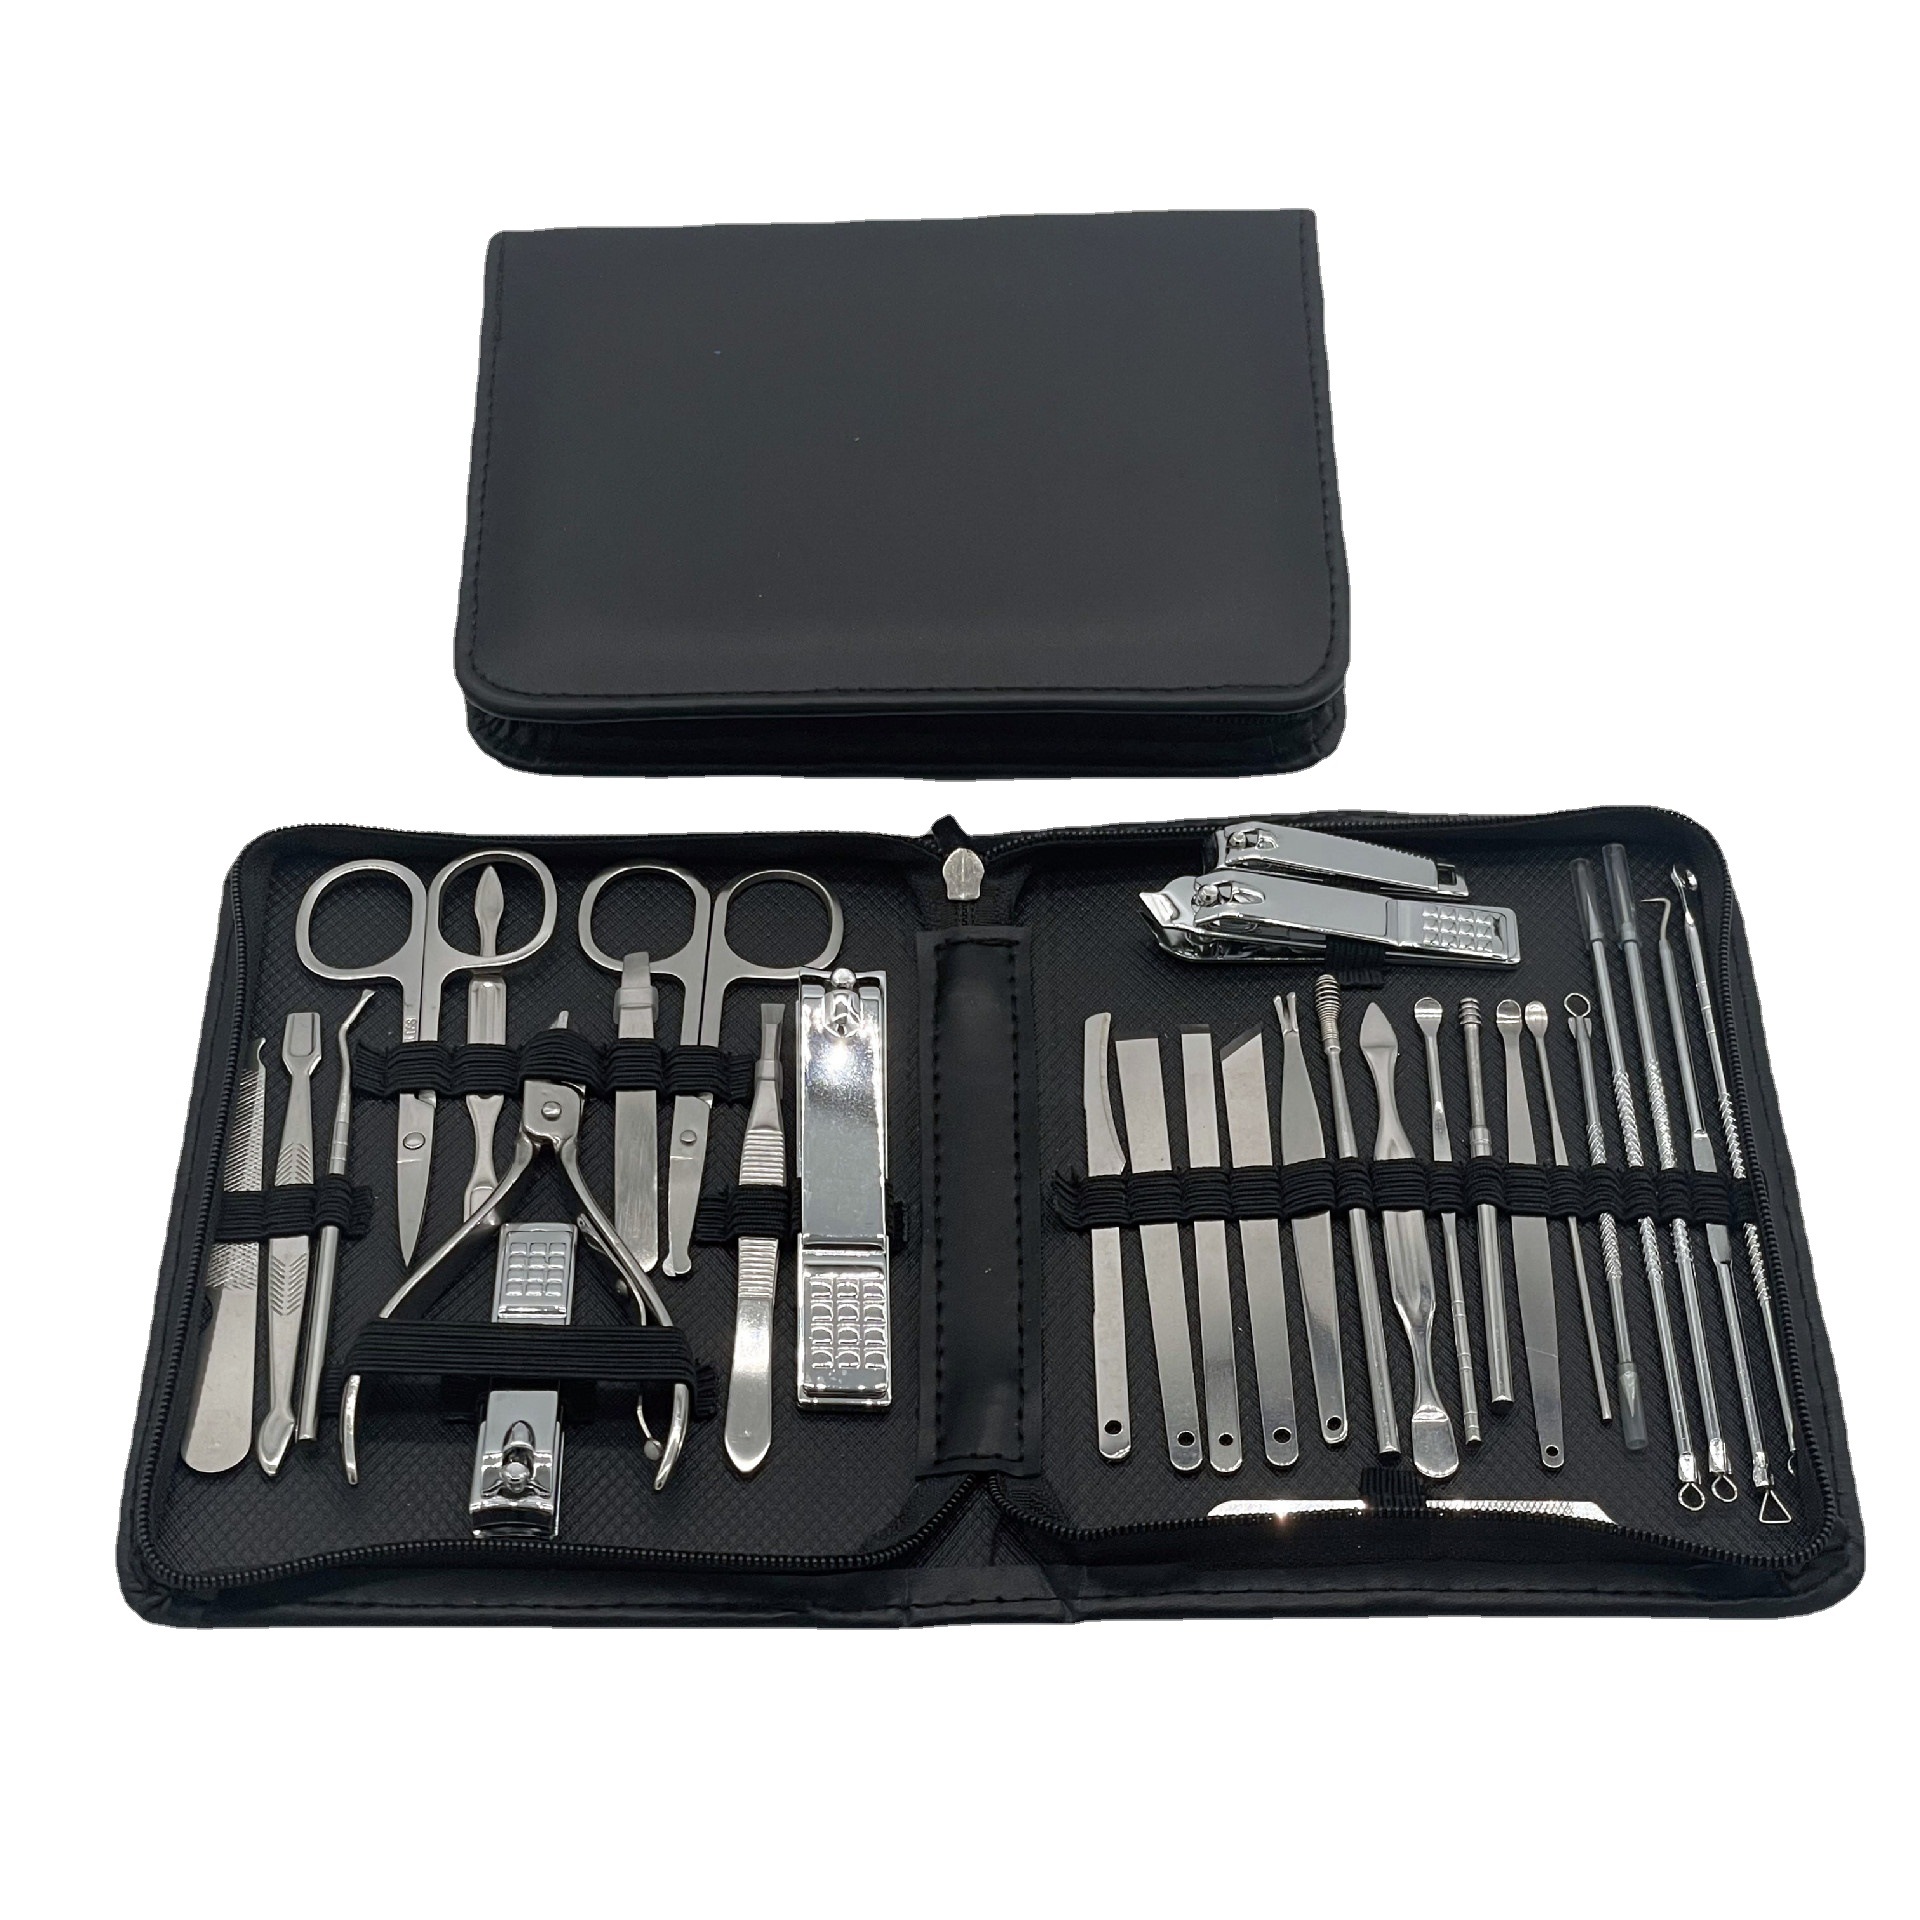 Nail Clippers 30-Piece Set Factory Direct Sales Manicure Tools Black Nail Clippers Full Set Manicure Nail Scissors 26-Piece Set